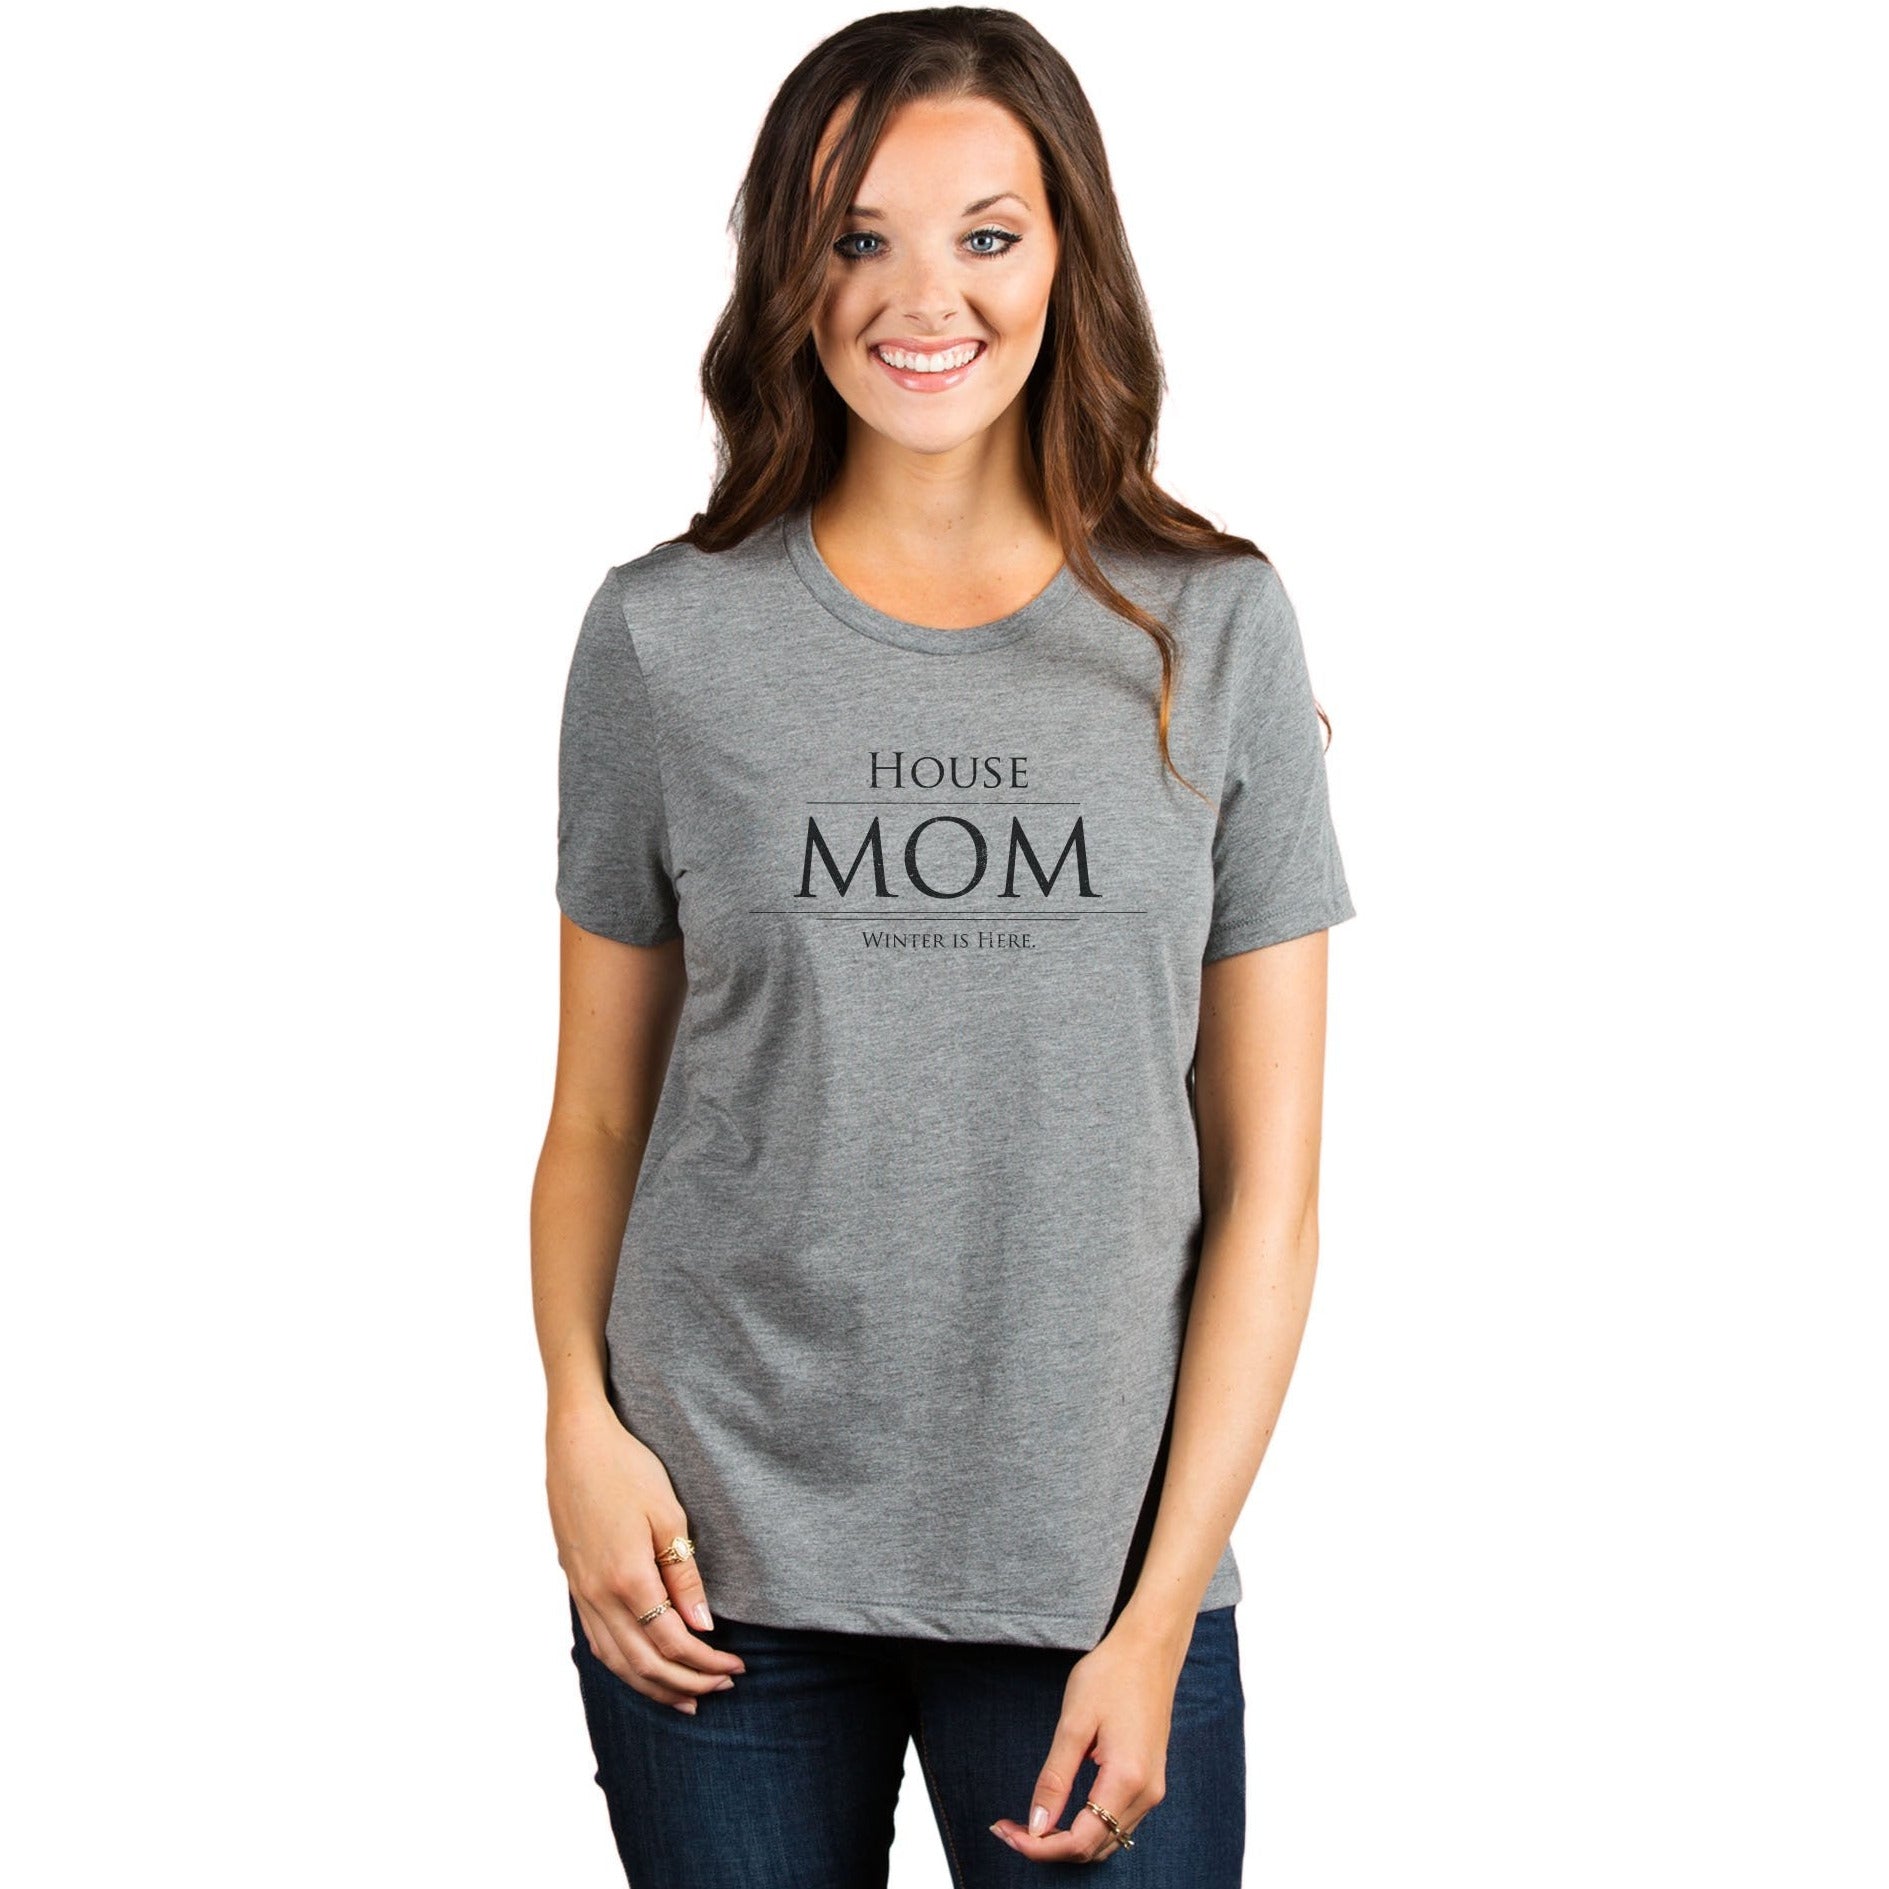 House Mom Winter Is Here Women's Relaxed Crewneck T-Shirt Top Tee Heather Grey Model
